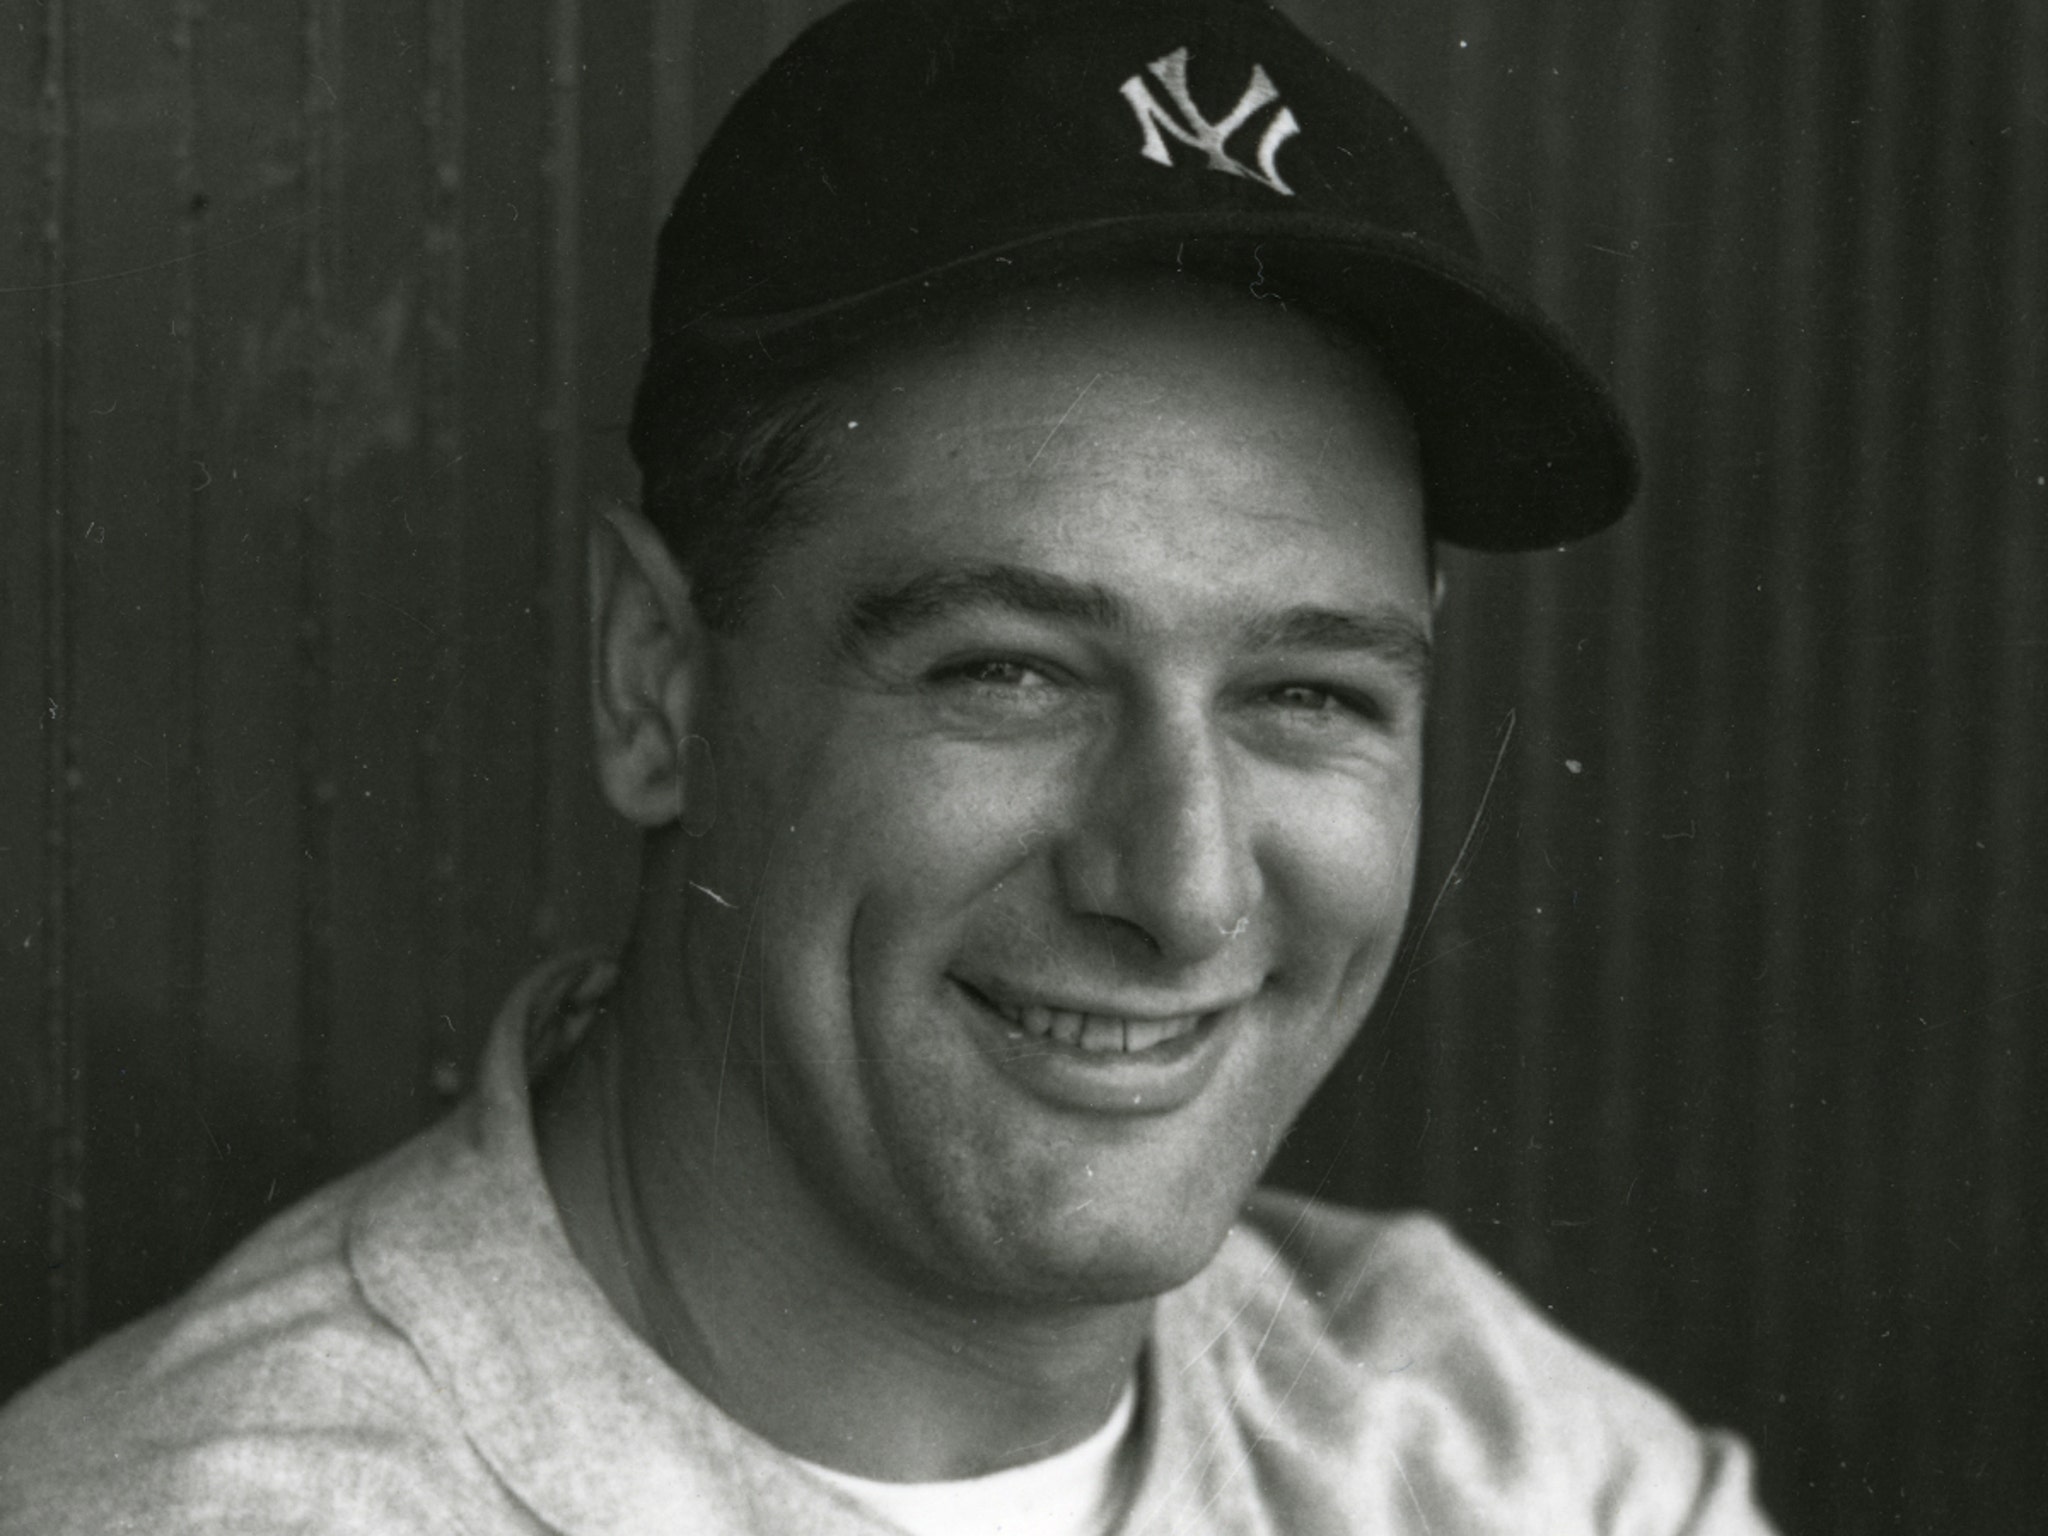 Major League Baseball announces details of the third annual “Lou Gehrig Day”  commemoration to support the ALS community - Lou Gehrig